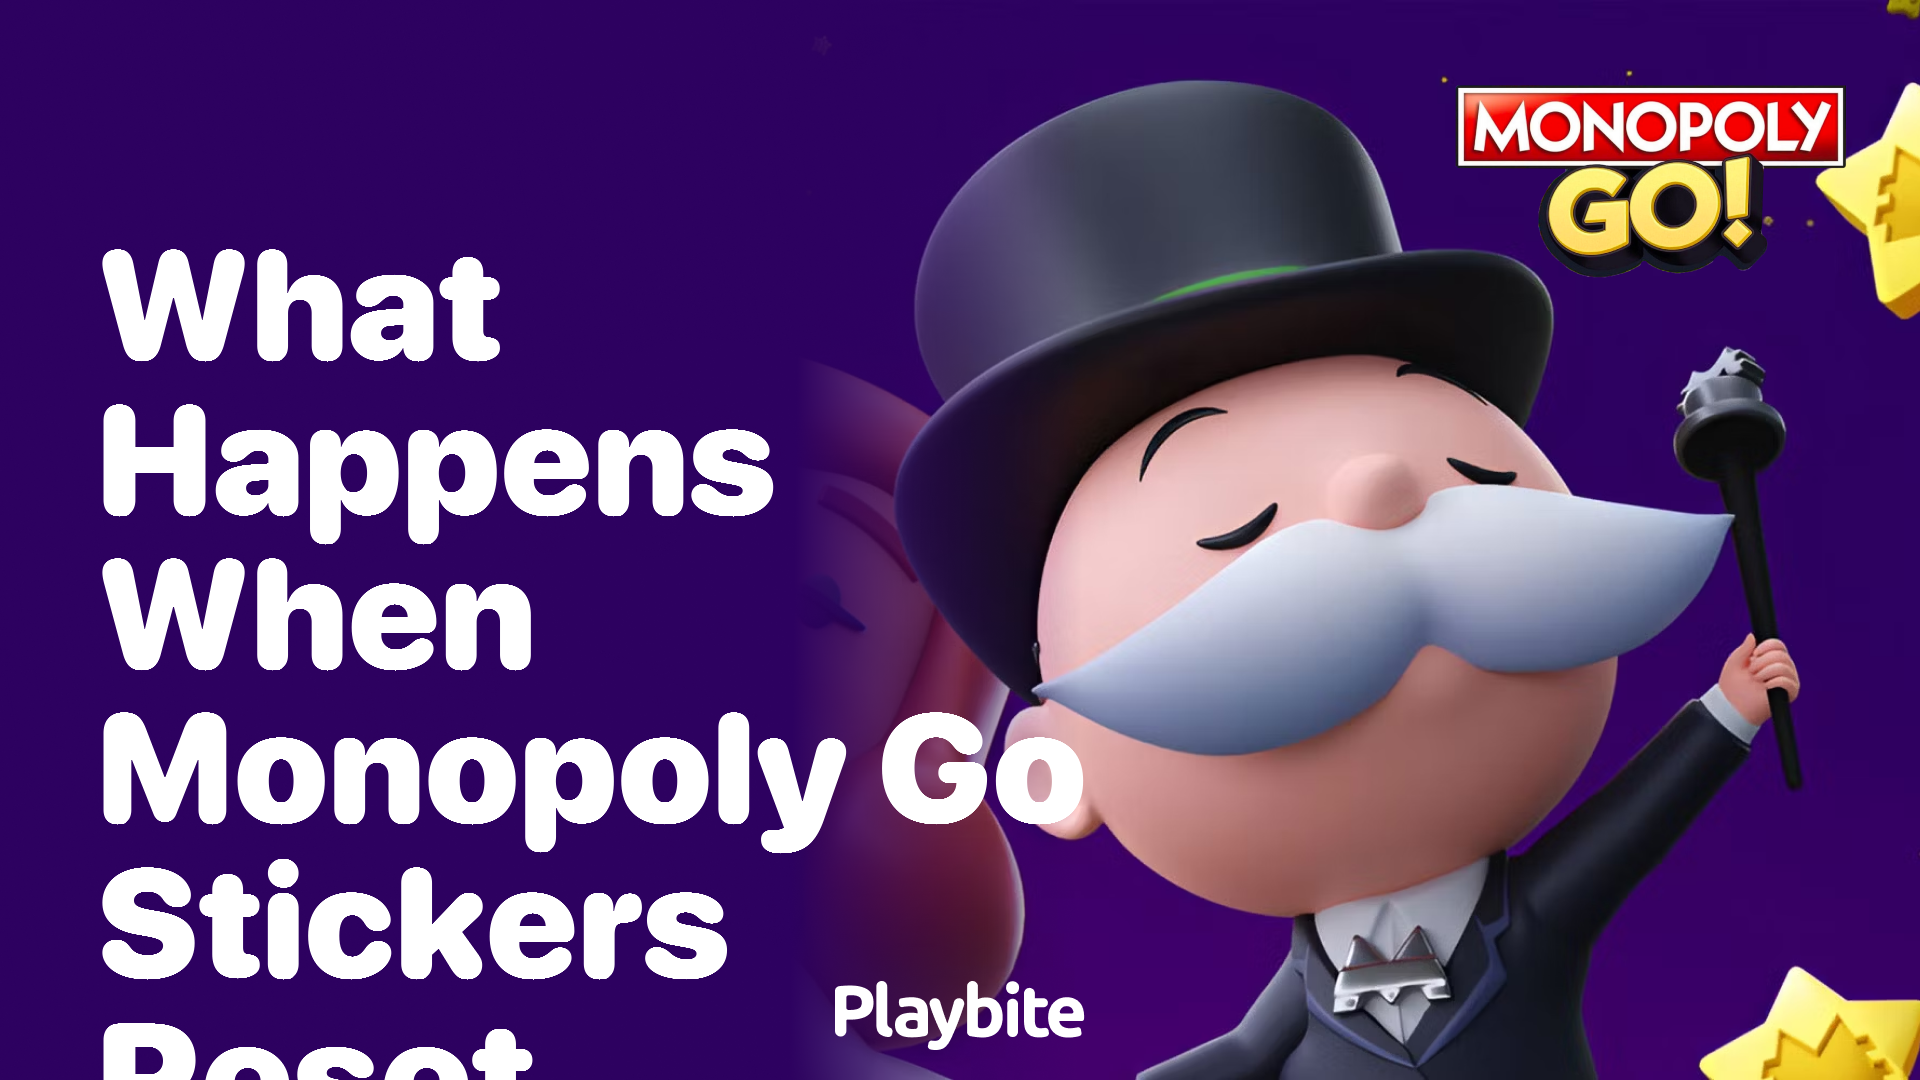 What Happens When Monopoly Go Stickers Reset?